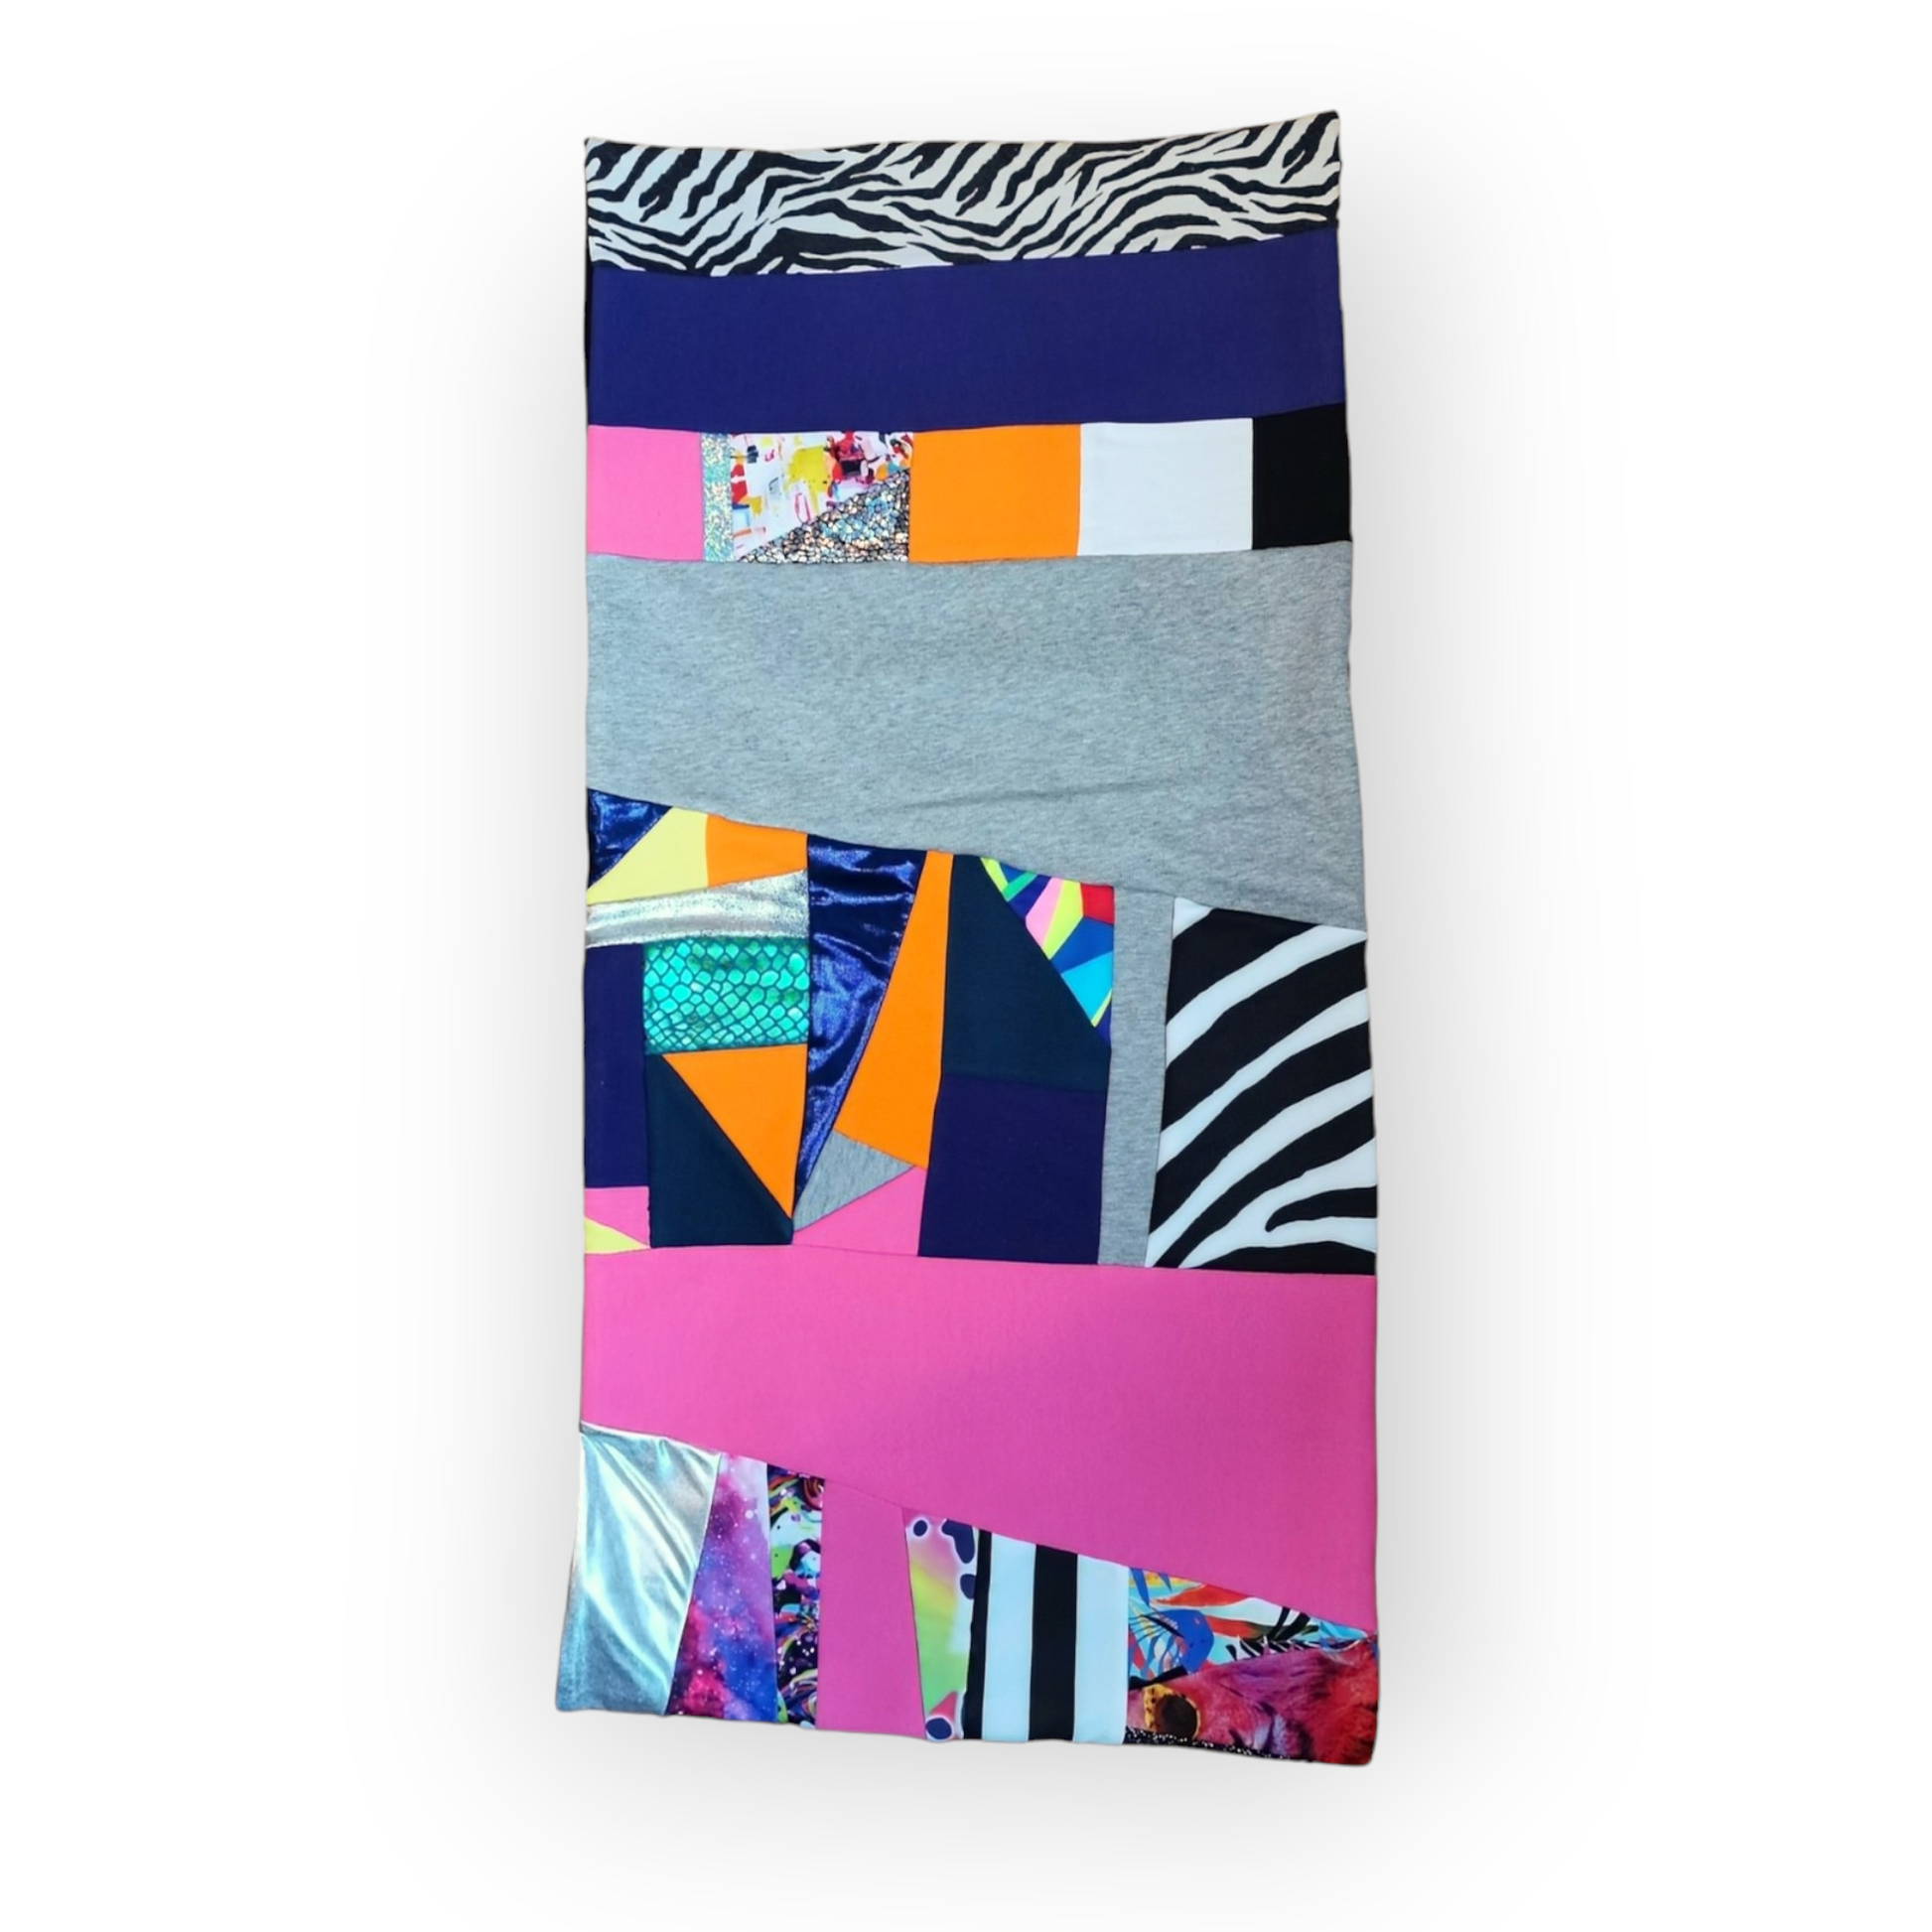 Large circular scarf made from recycled scrap fabrics.  Lined in black fleece and including bright, printed, multi coloured patchwork panels and large colour blocks in grey, pink, purple and blue. Pictured flat on white background. 